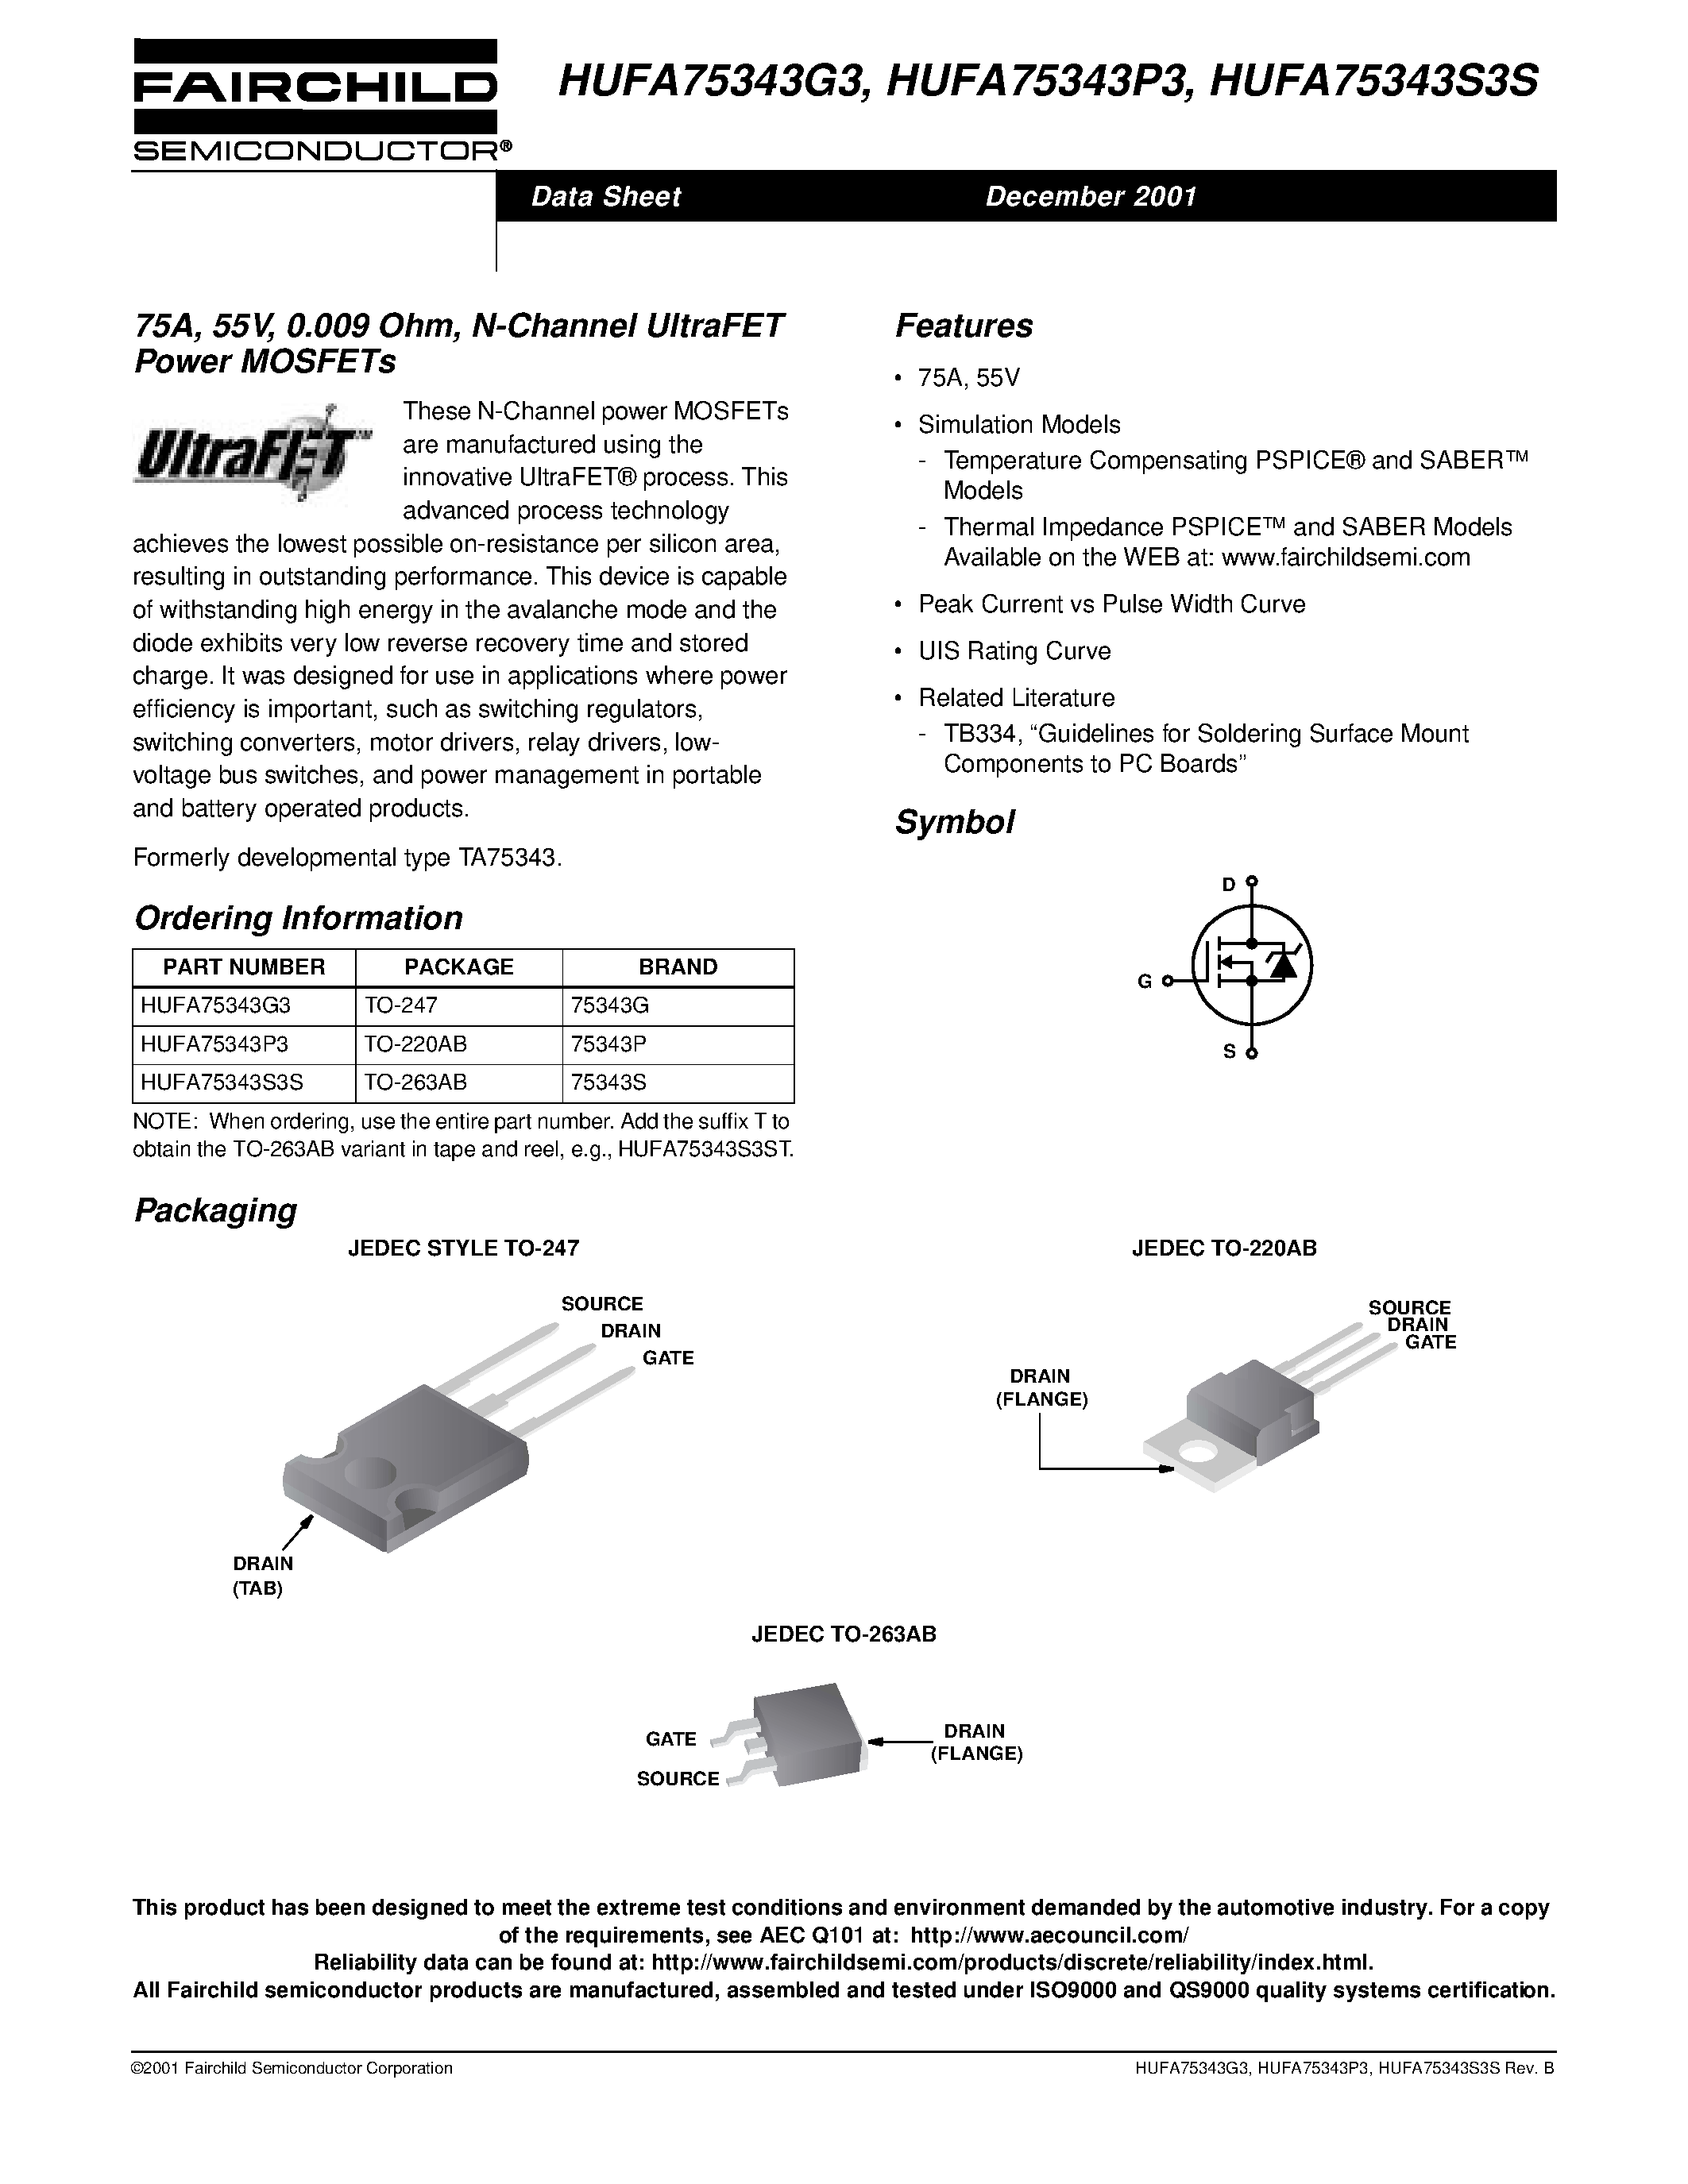 Datasheet HUFA75343P3 - 75A/ 55V/ 0.009 Ohm/ N-Channel UltraFET Power MOSFETs page 1